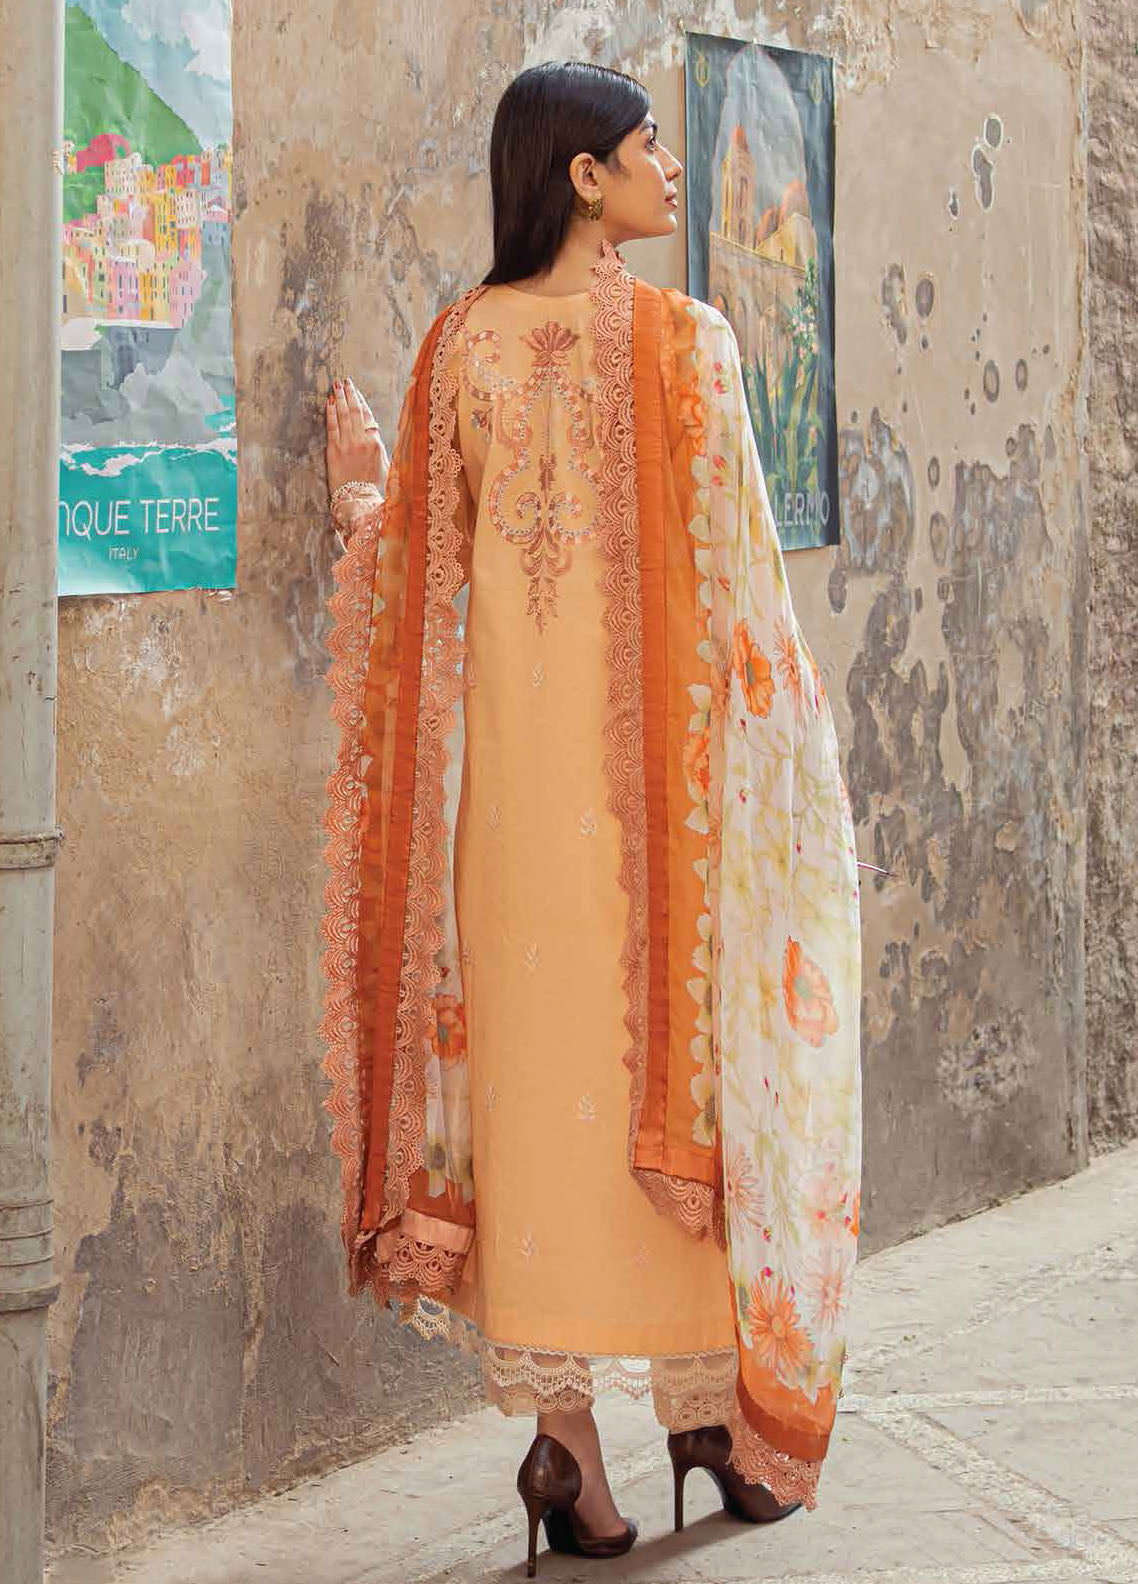 Hemline by Mushq Embroidered Lawn Suits Unstitched 3 Piece MQ23HMS HML23-7B ELISA - Spring / Summer Collection